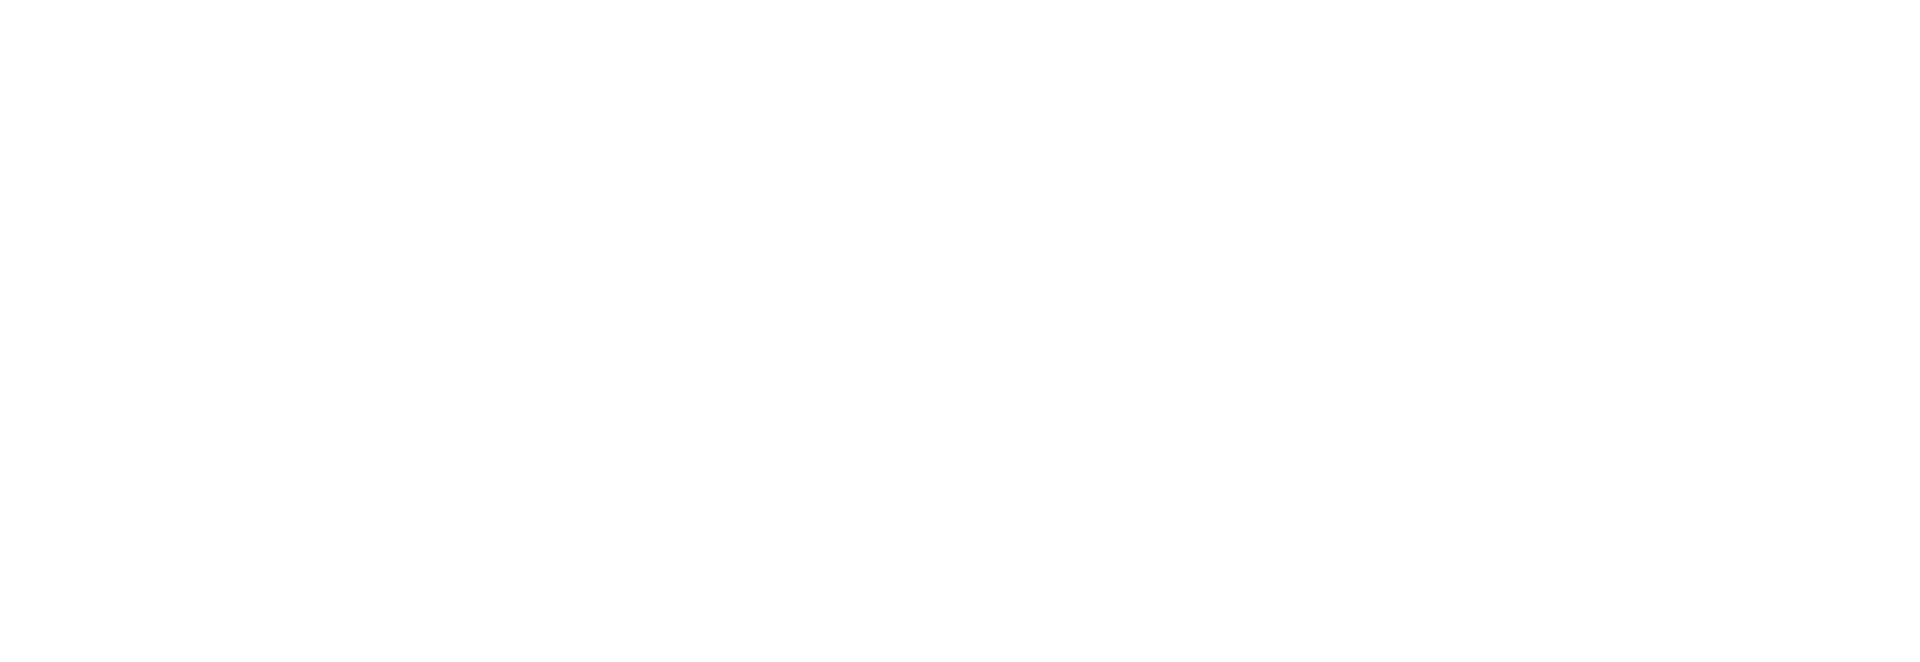 logo_musees-chateau_blanc.png